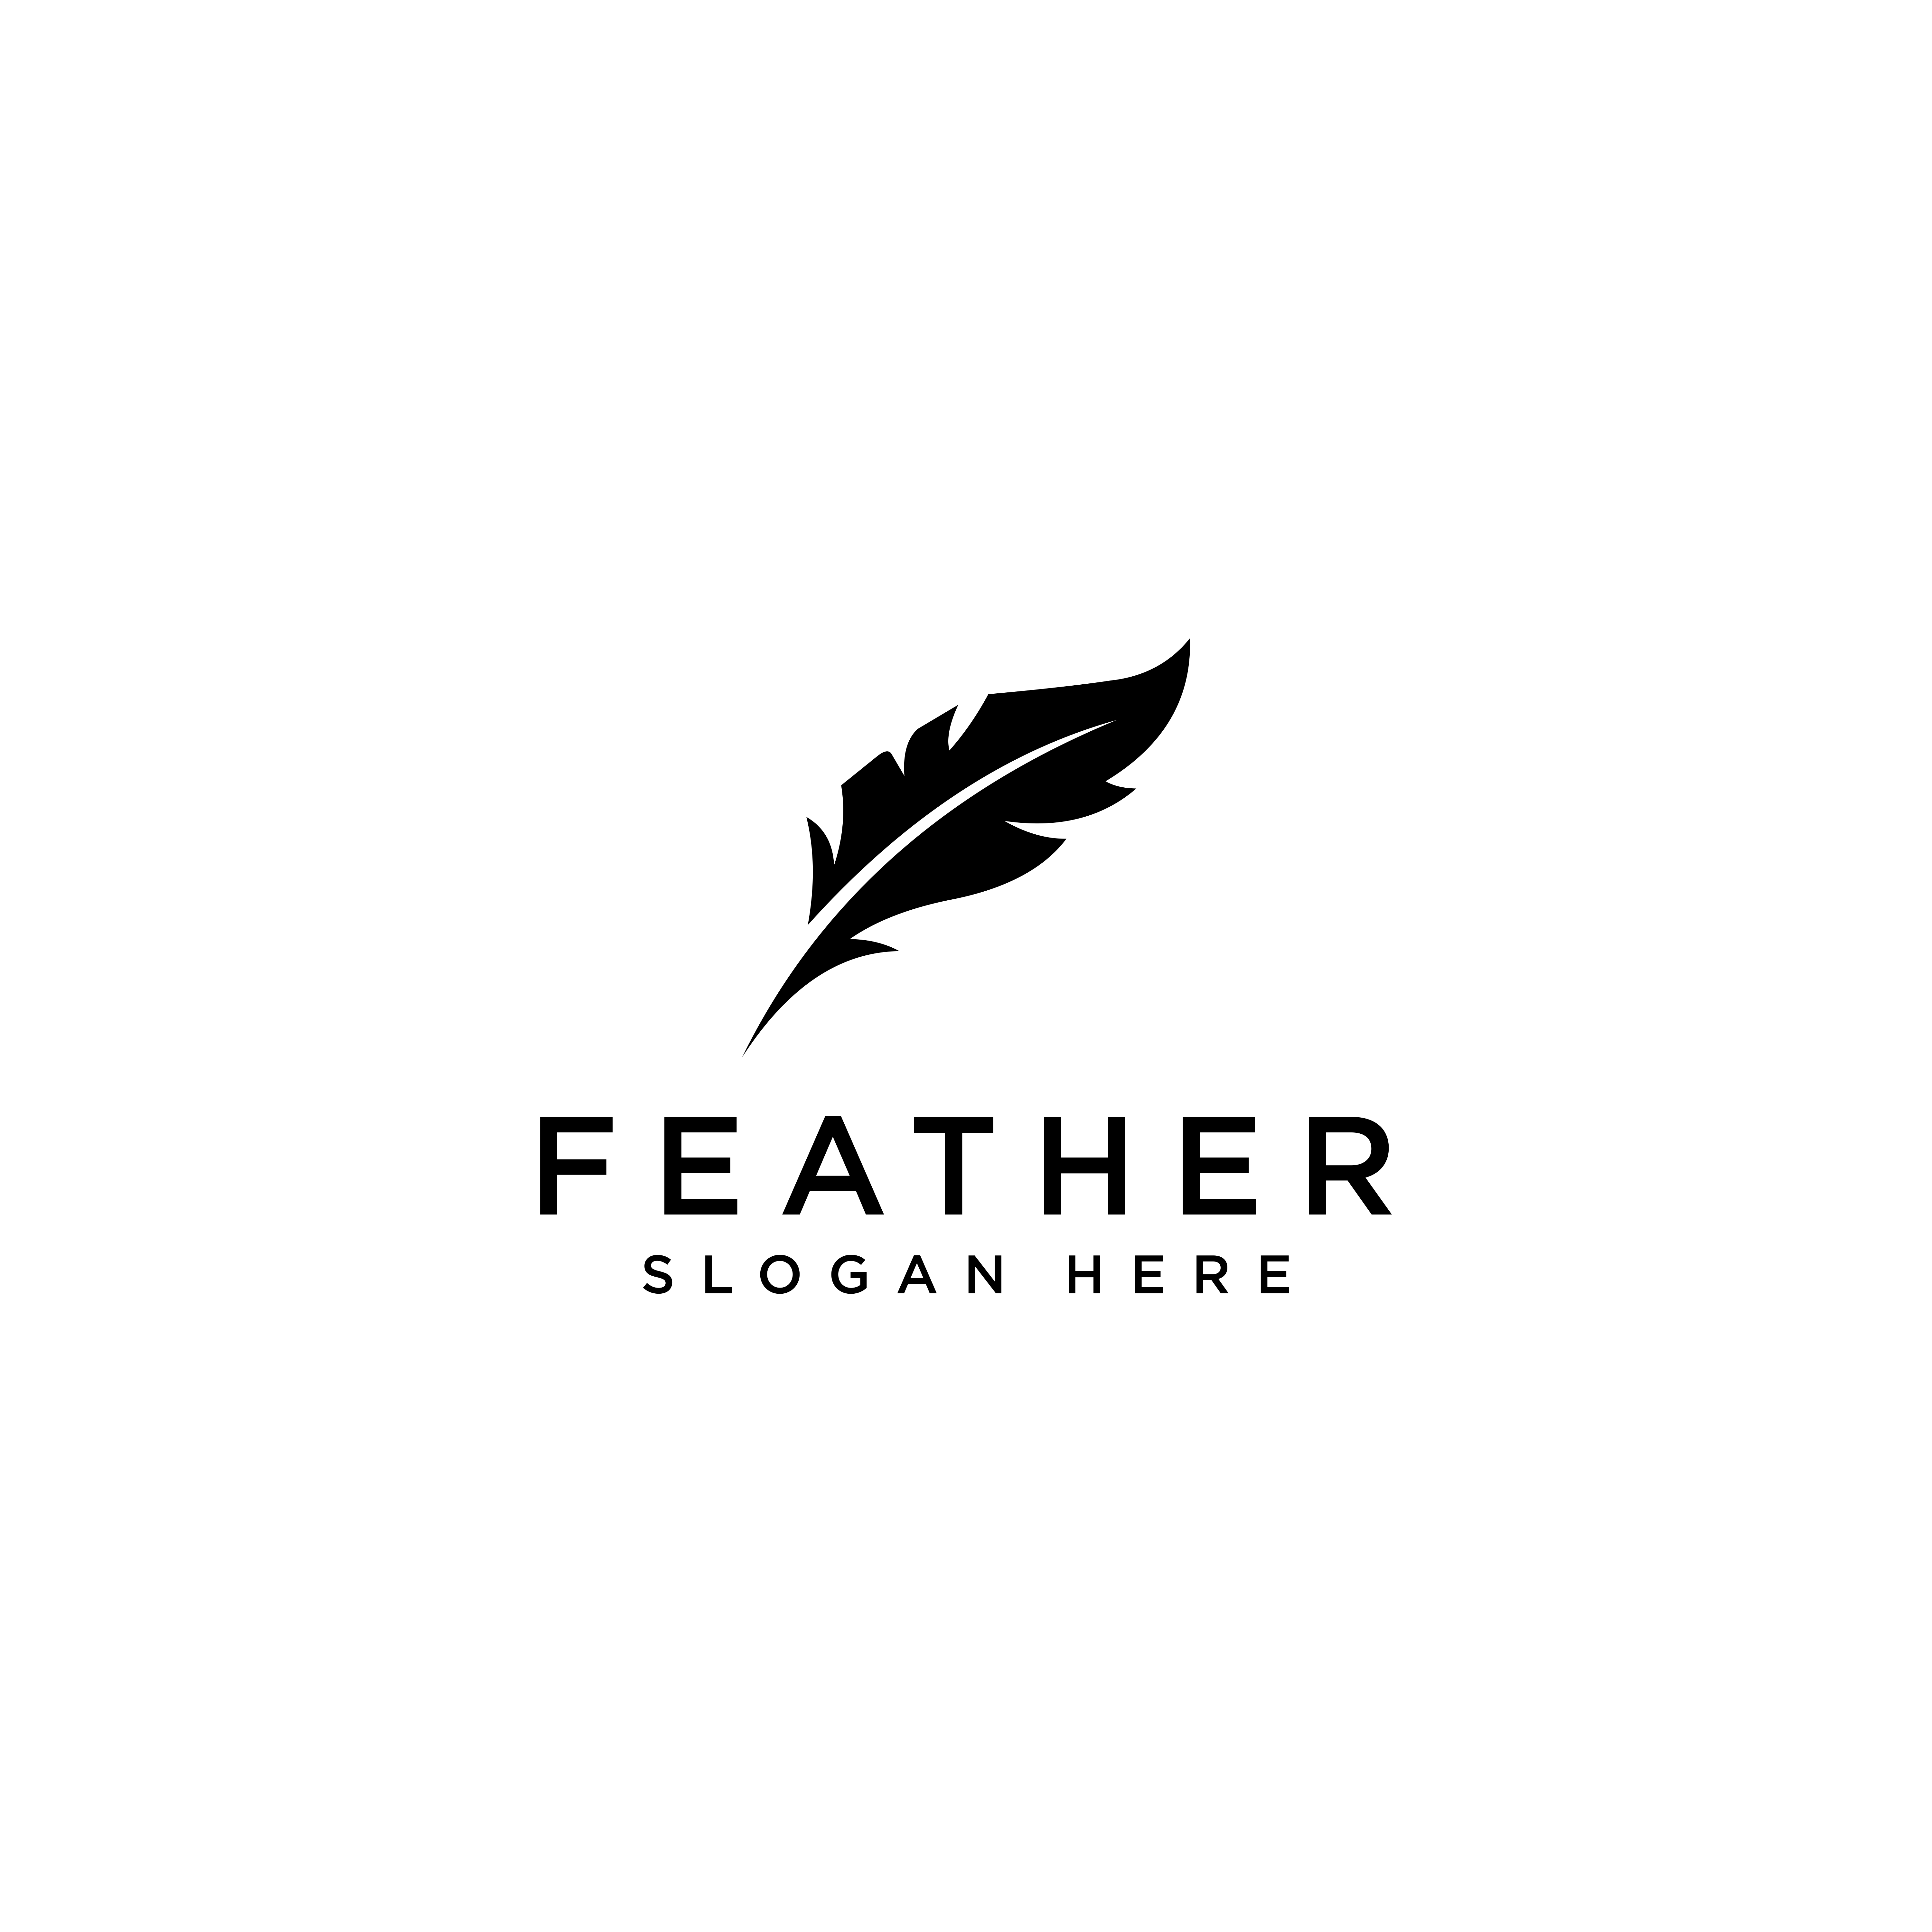 feather silhouette vector design template cover image.